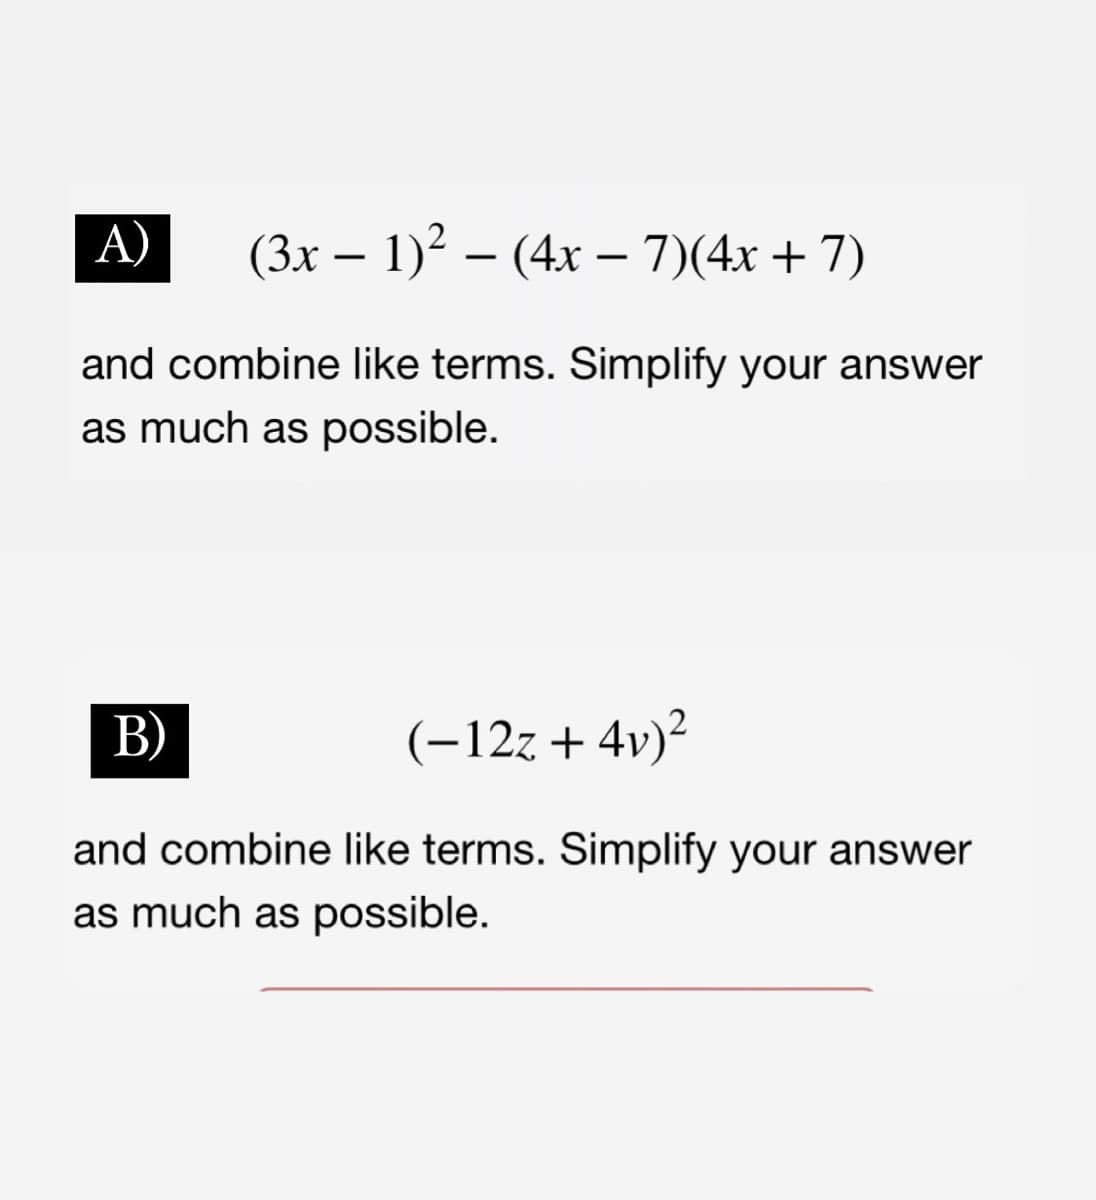 A) (3x − 1)² (4x-7)(4x + 7)
-
-
and combine like terms. Simplify your answer
as much as possible.
B)
(-12z+4v)²
and combine like terms. Simplify your answer
as much as possible.